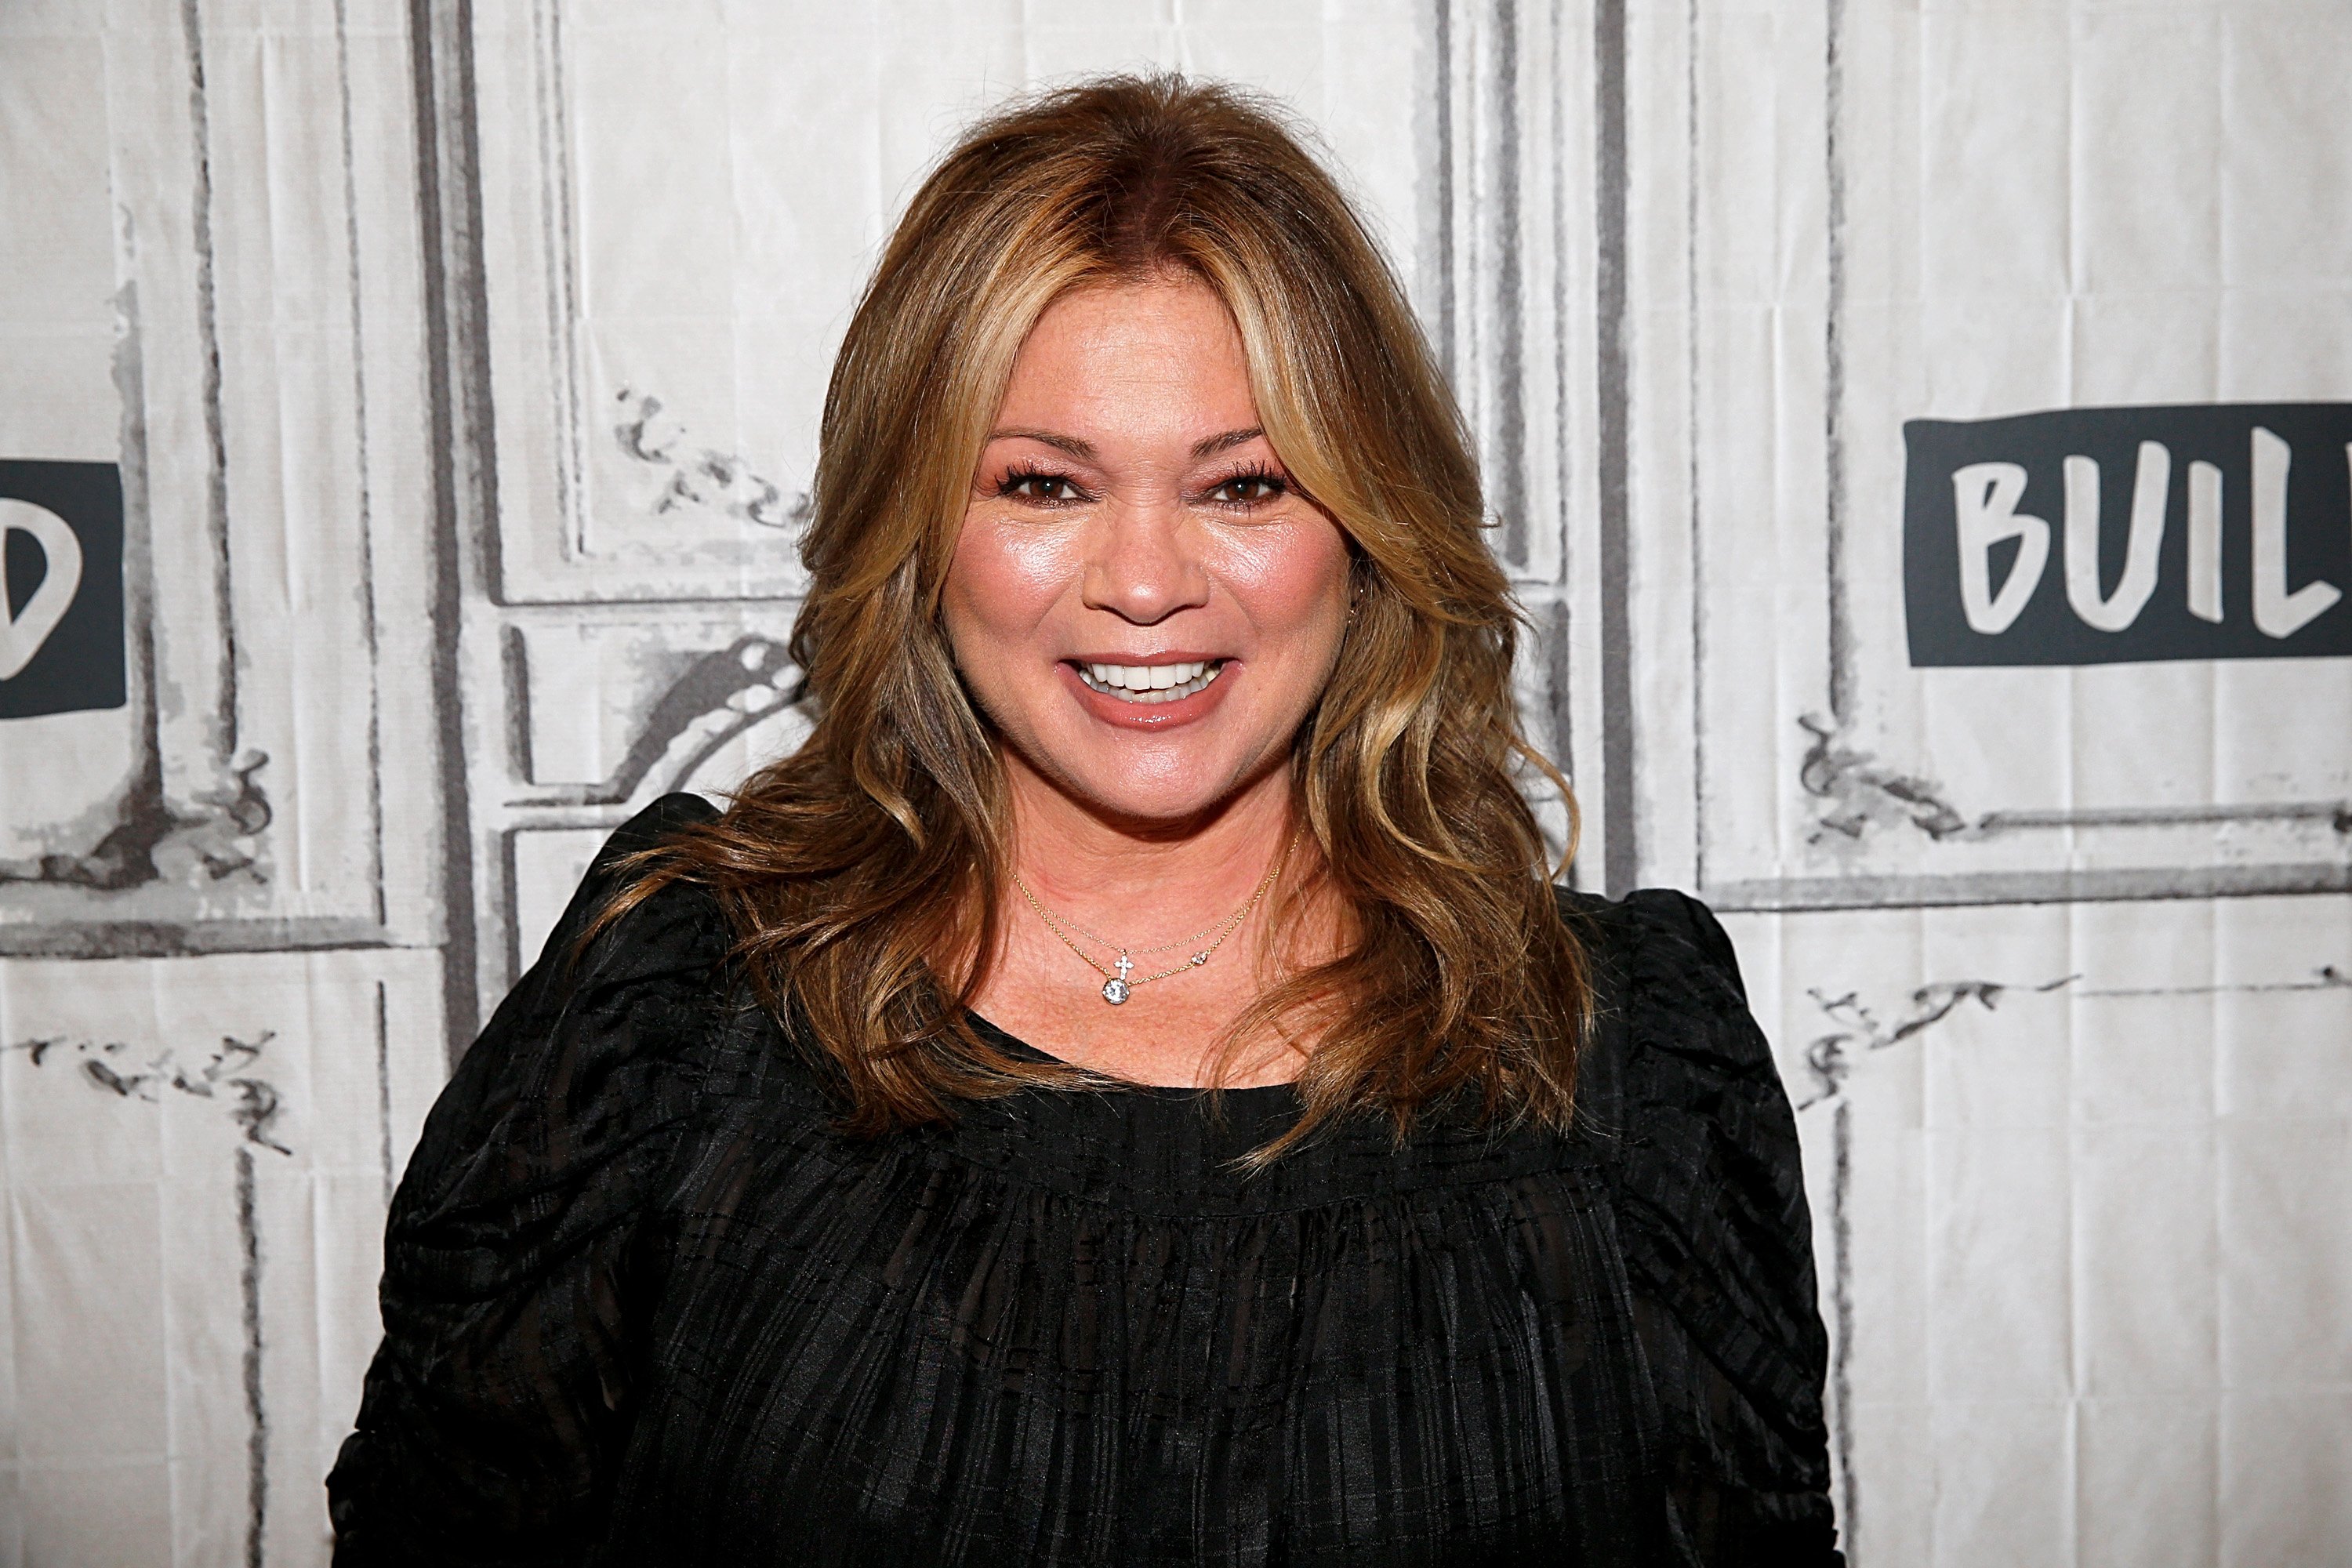 Food Network personality Valerie Bertinelli wears a long-sleeved black top in this photograph.